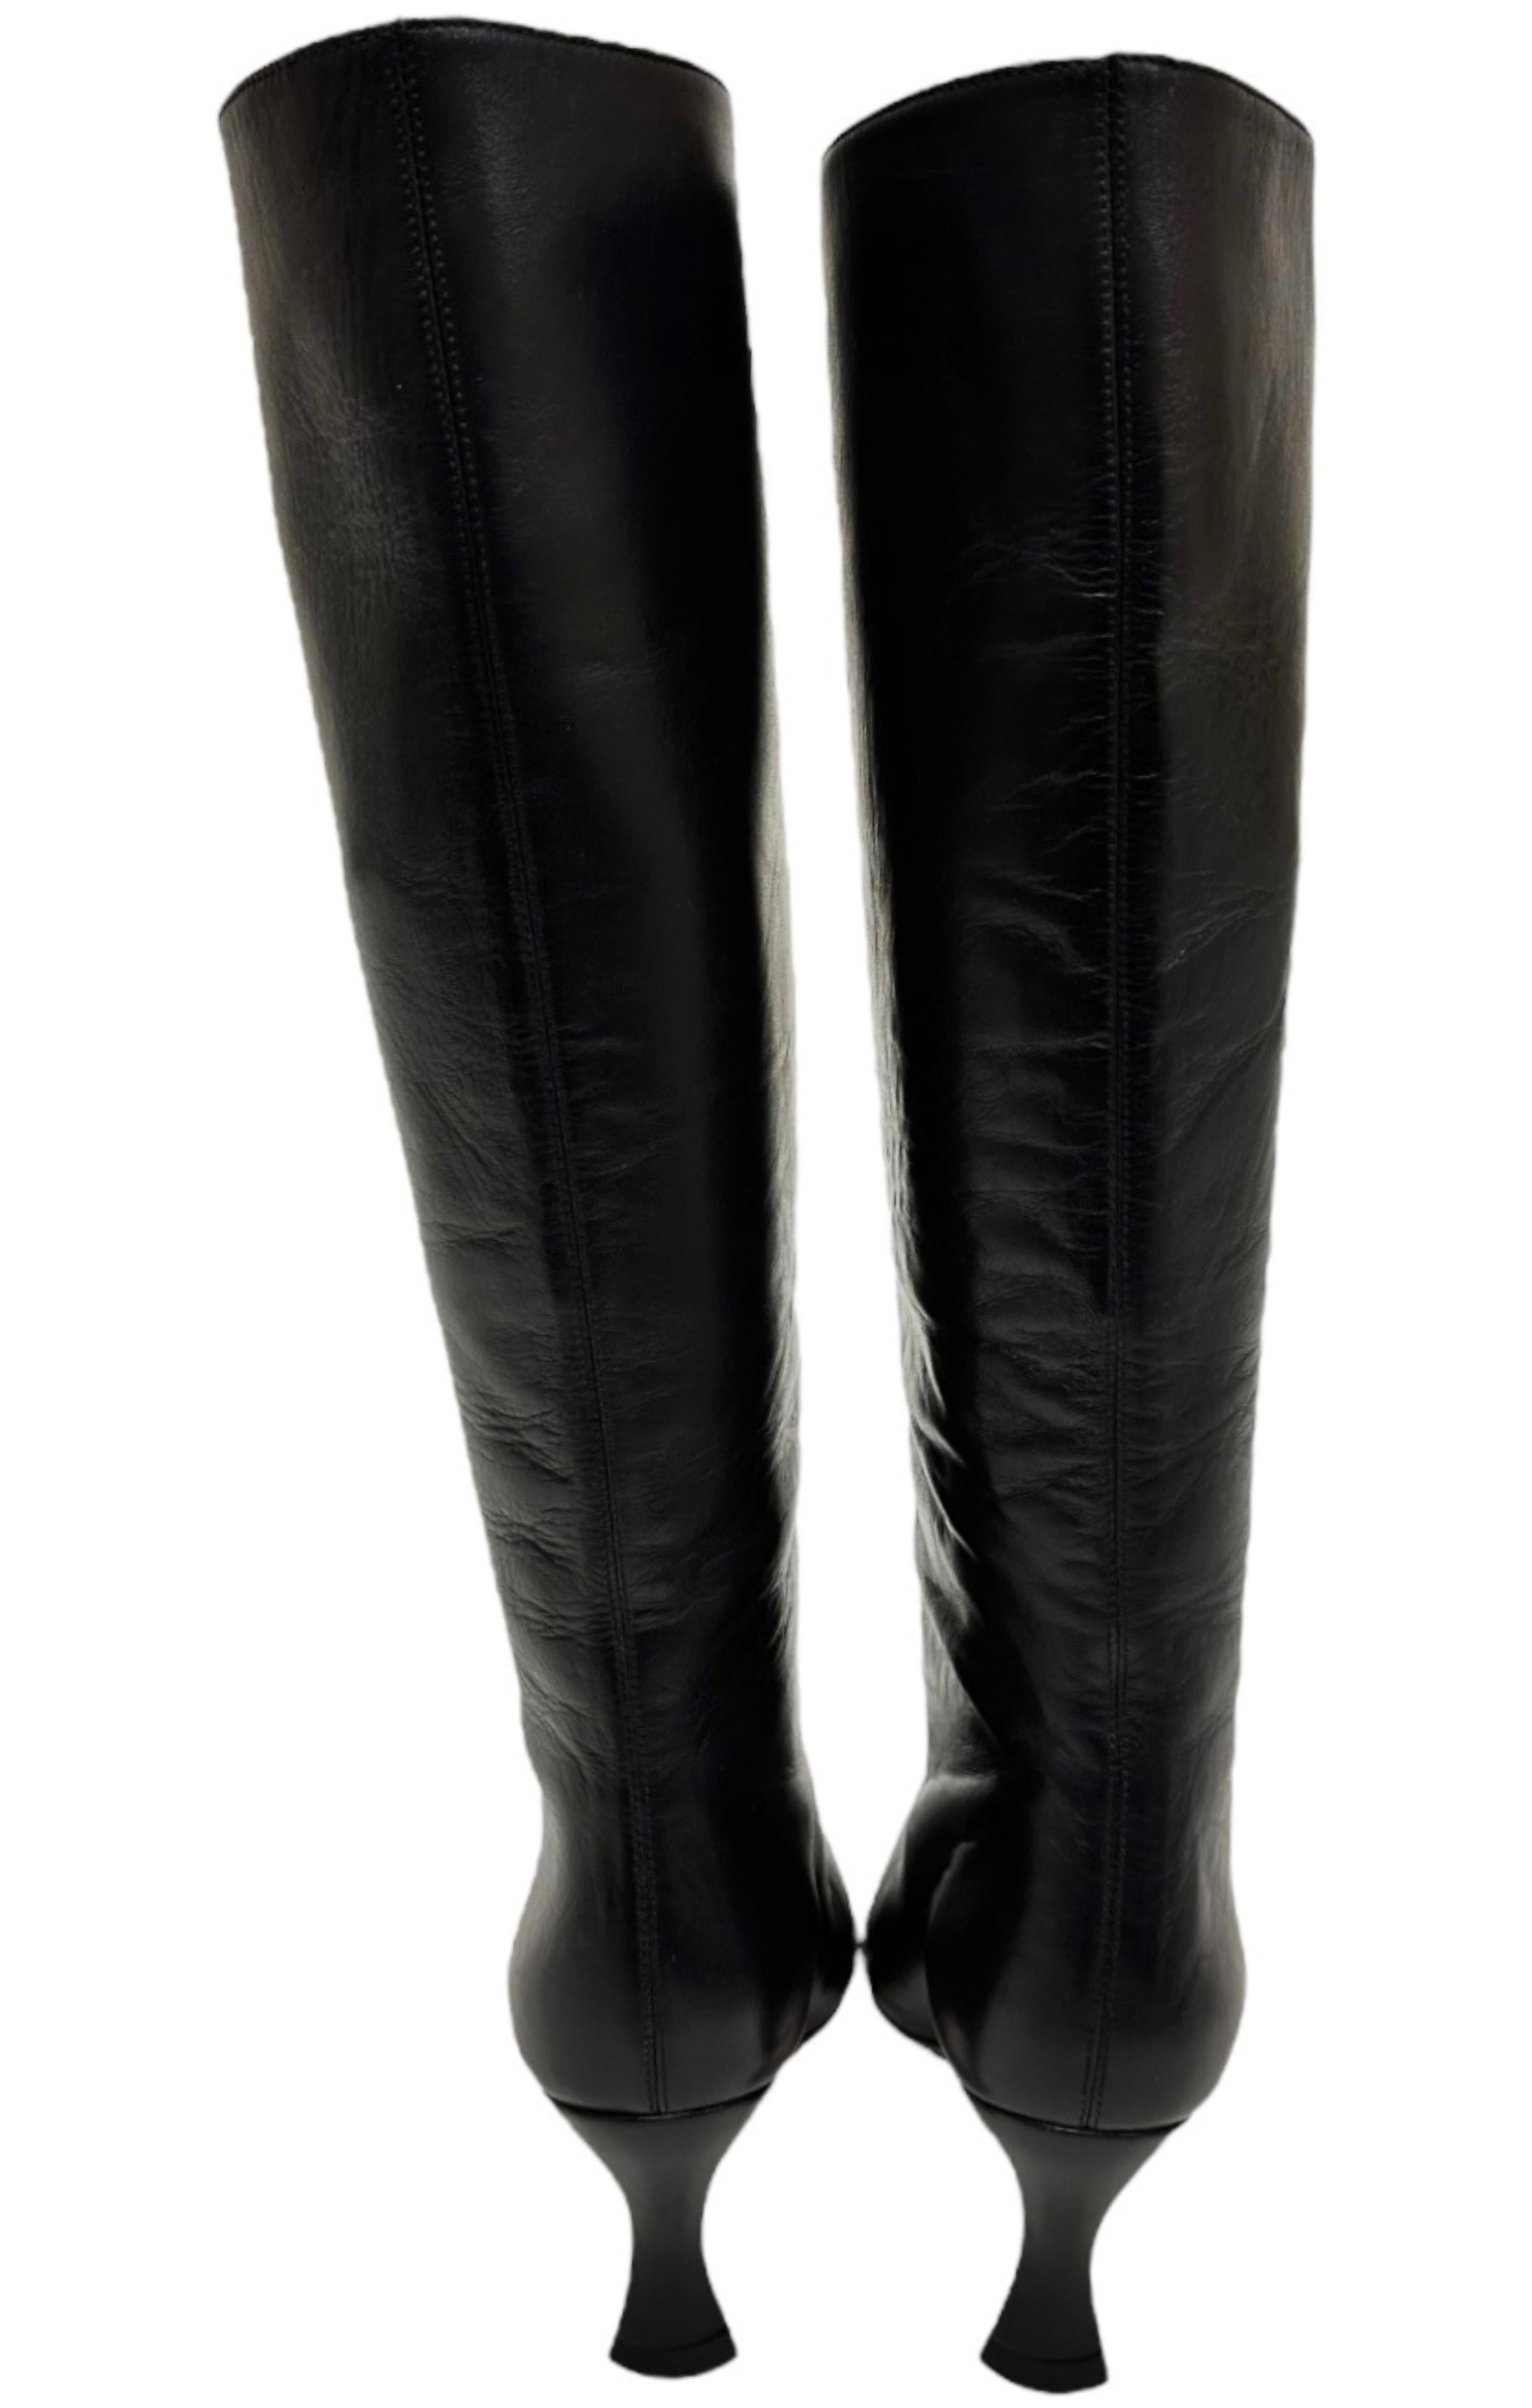 BY FAR Boots Size: EUR 35 / Fit like US 5